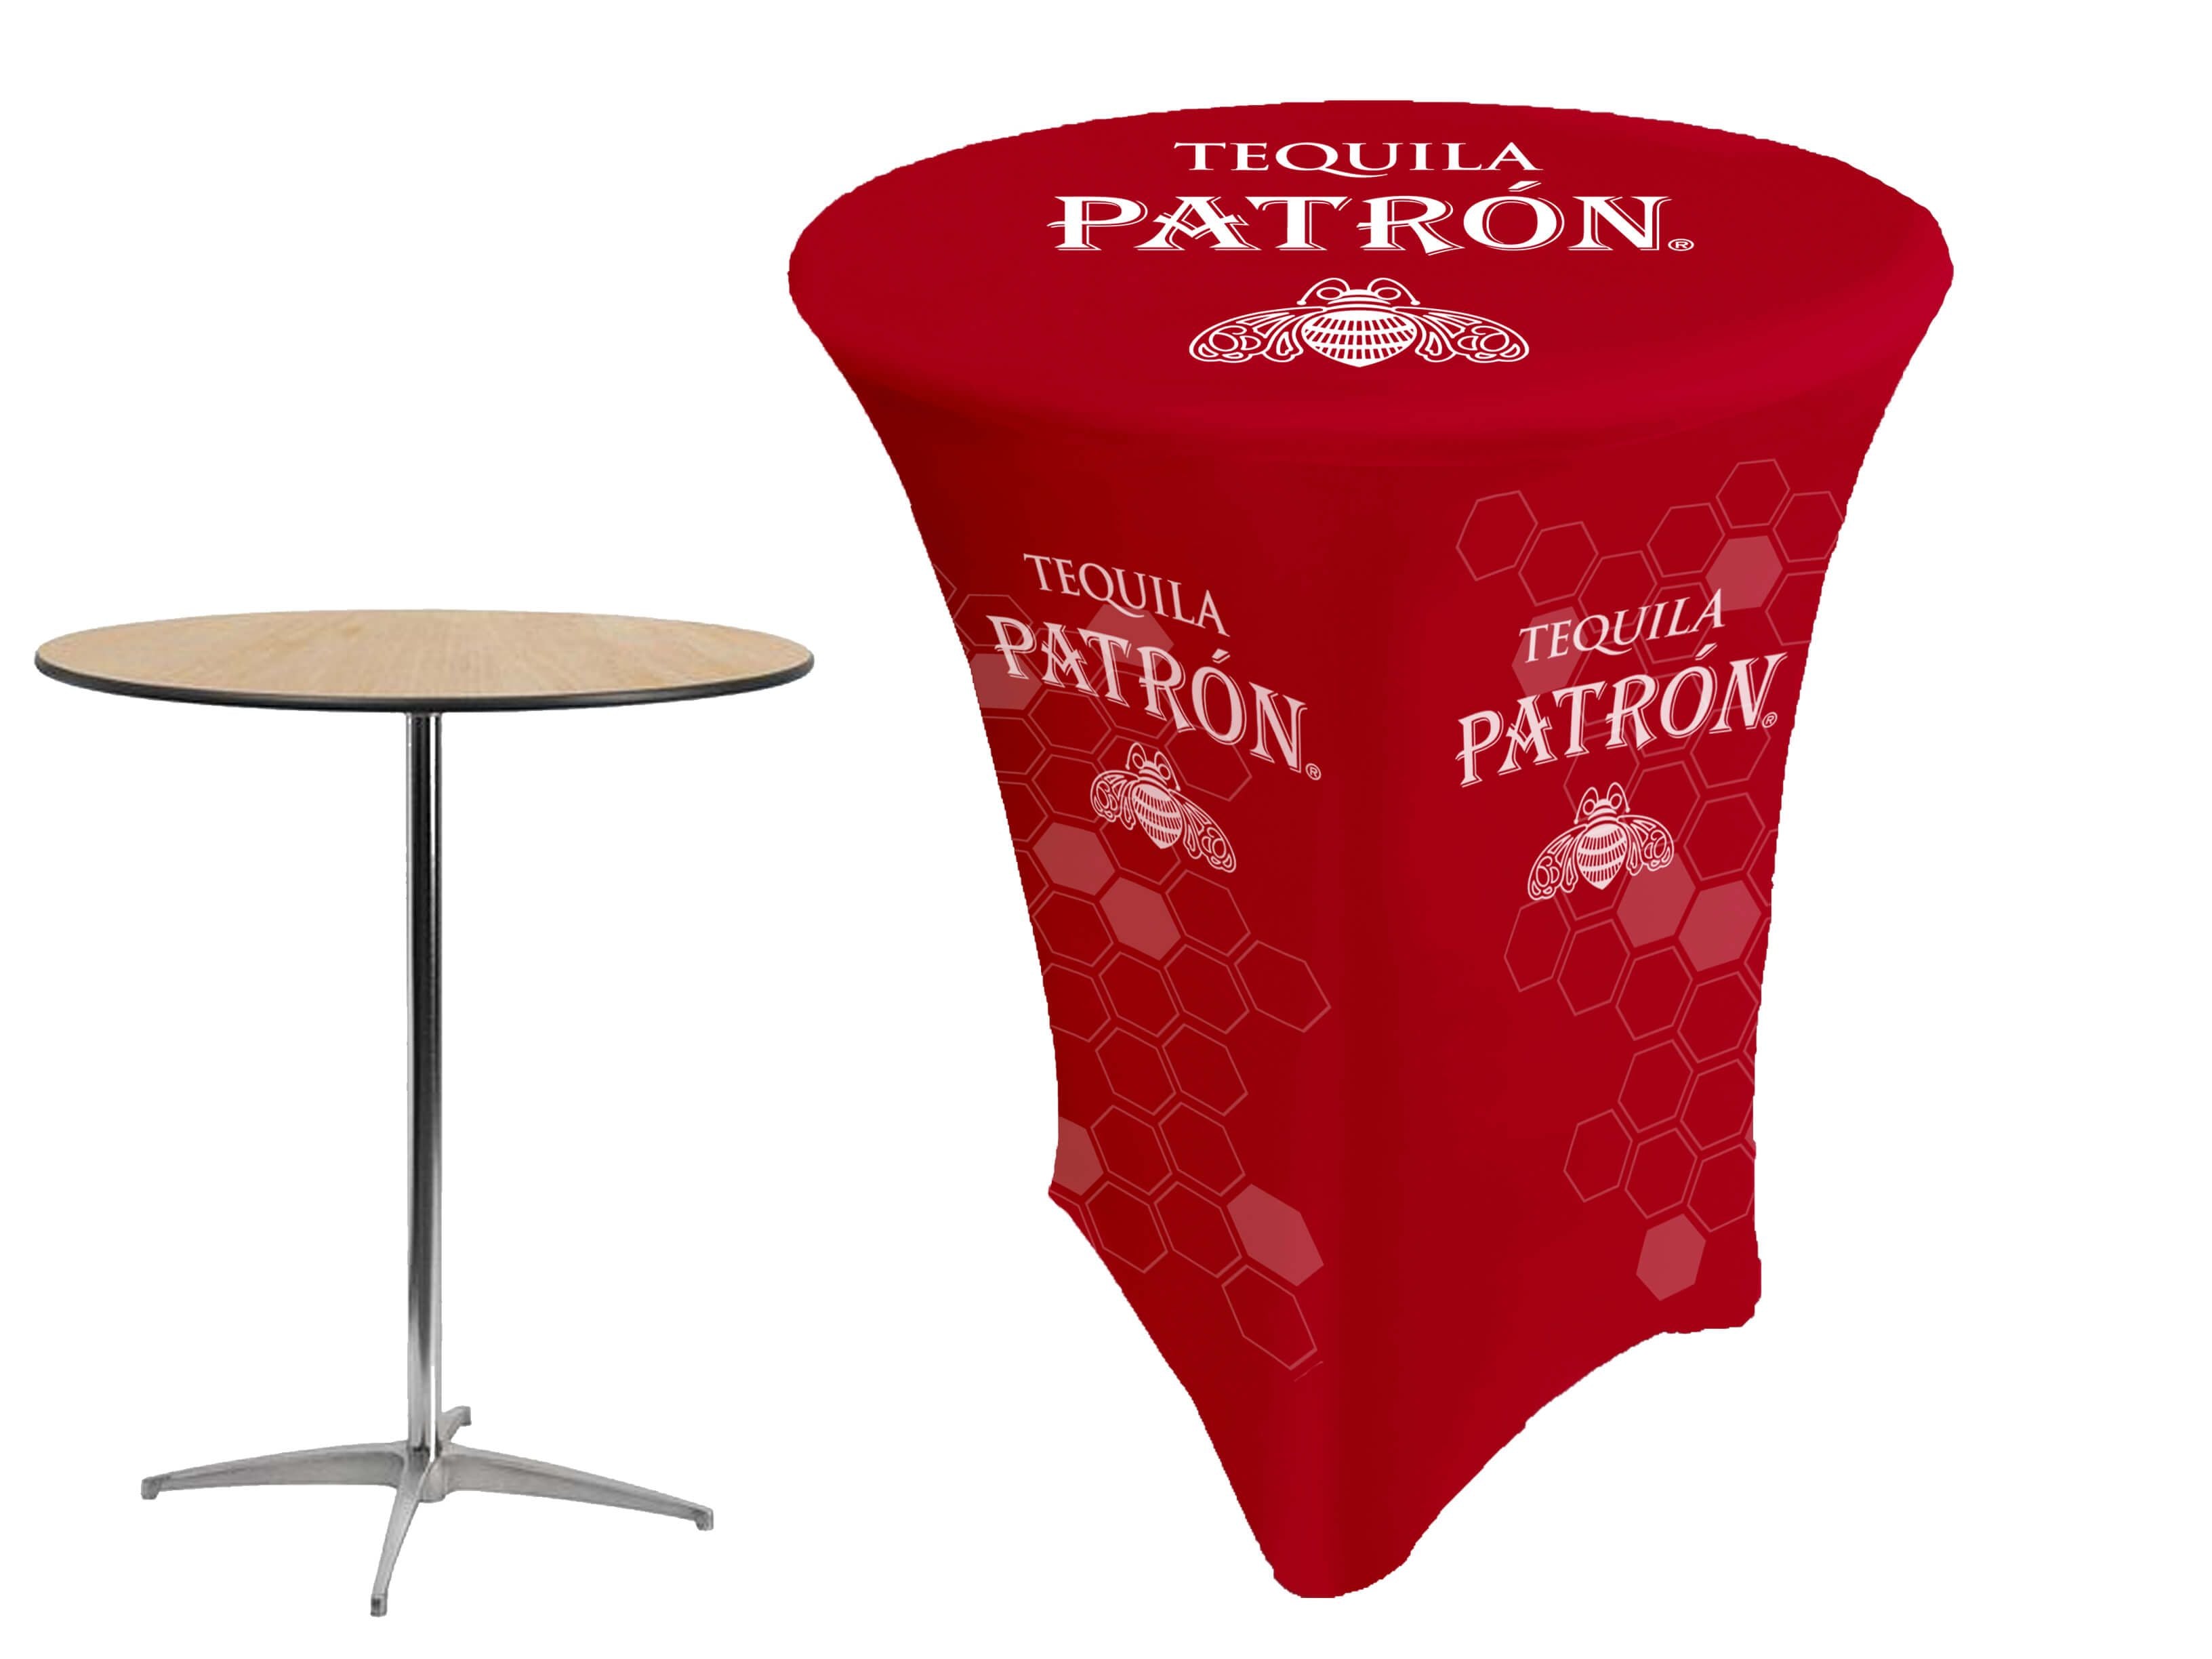 Fitted custom table cover providing a professional presentation at trade shows